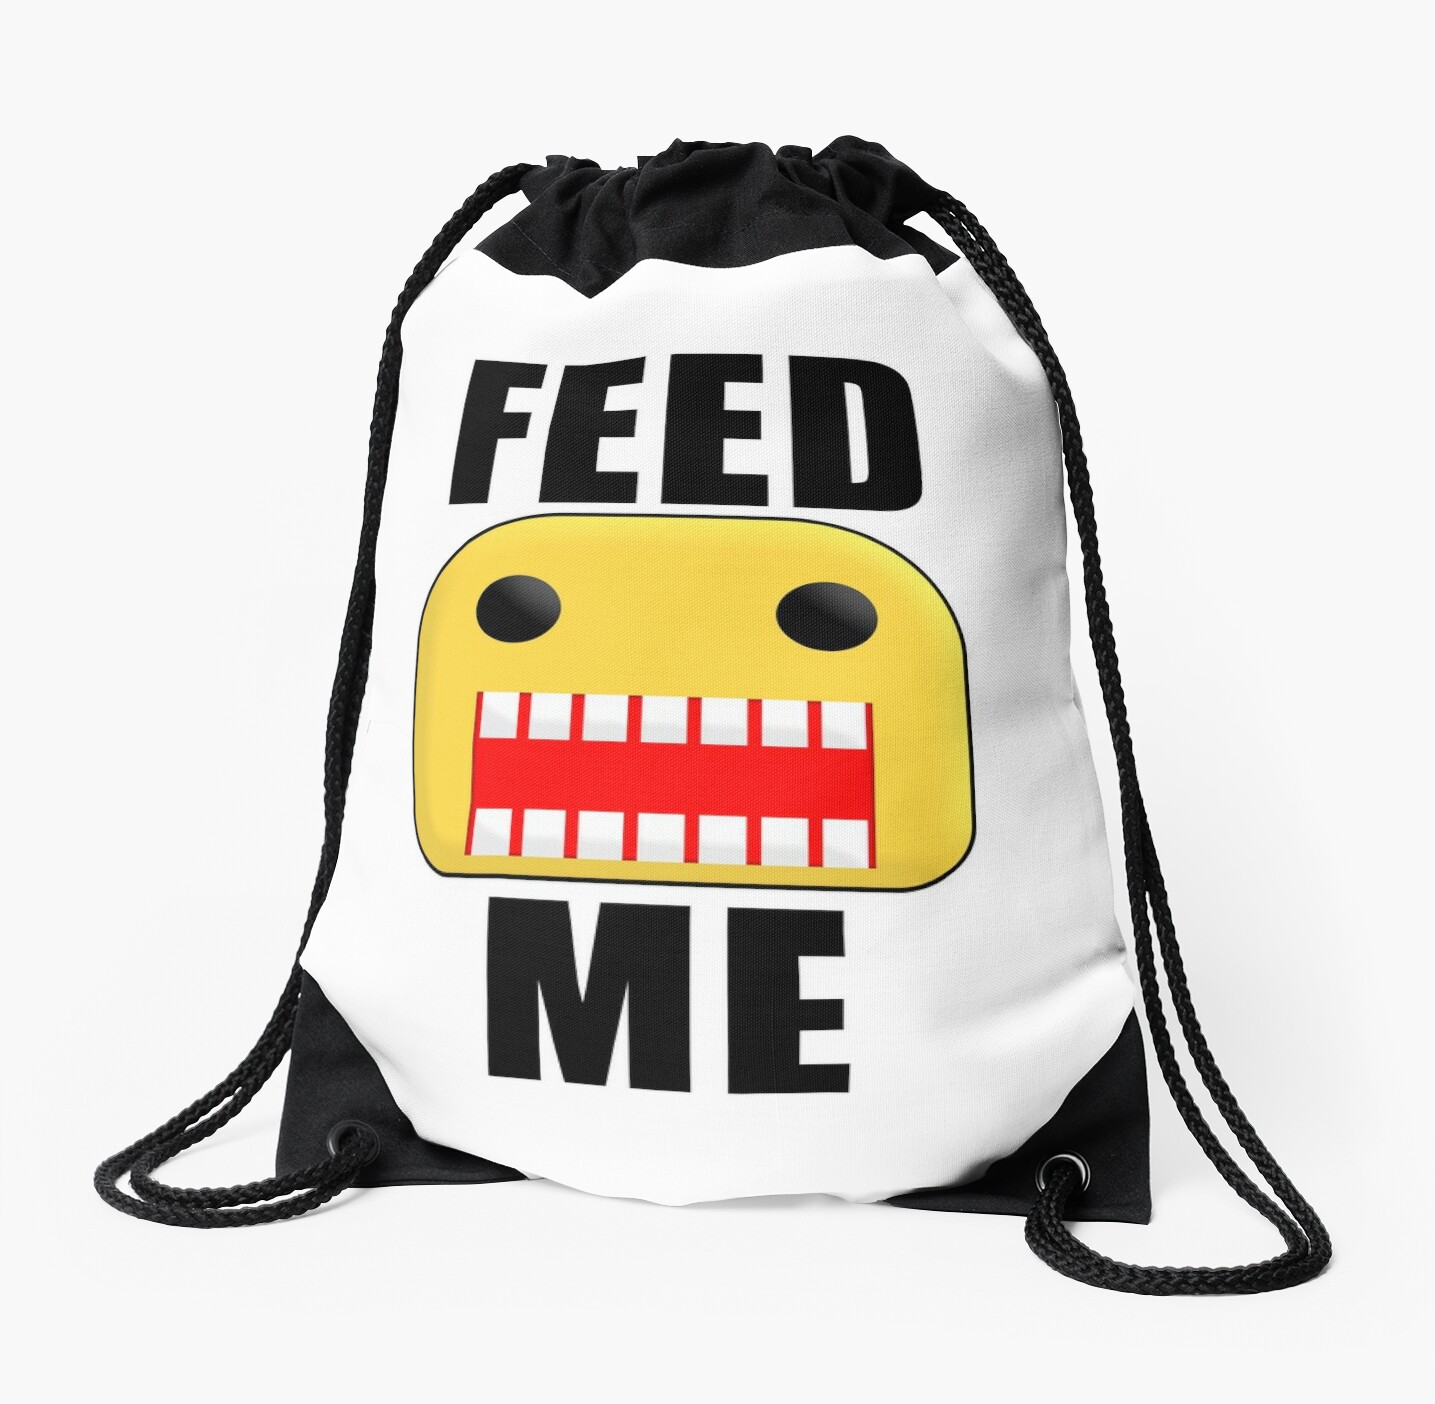 Roblox Feed Me Giant Noob Drawstring Bag By Jenr8d Designs - roblox get eaten by the noob drawstring bag by jenr8d designs